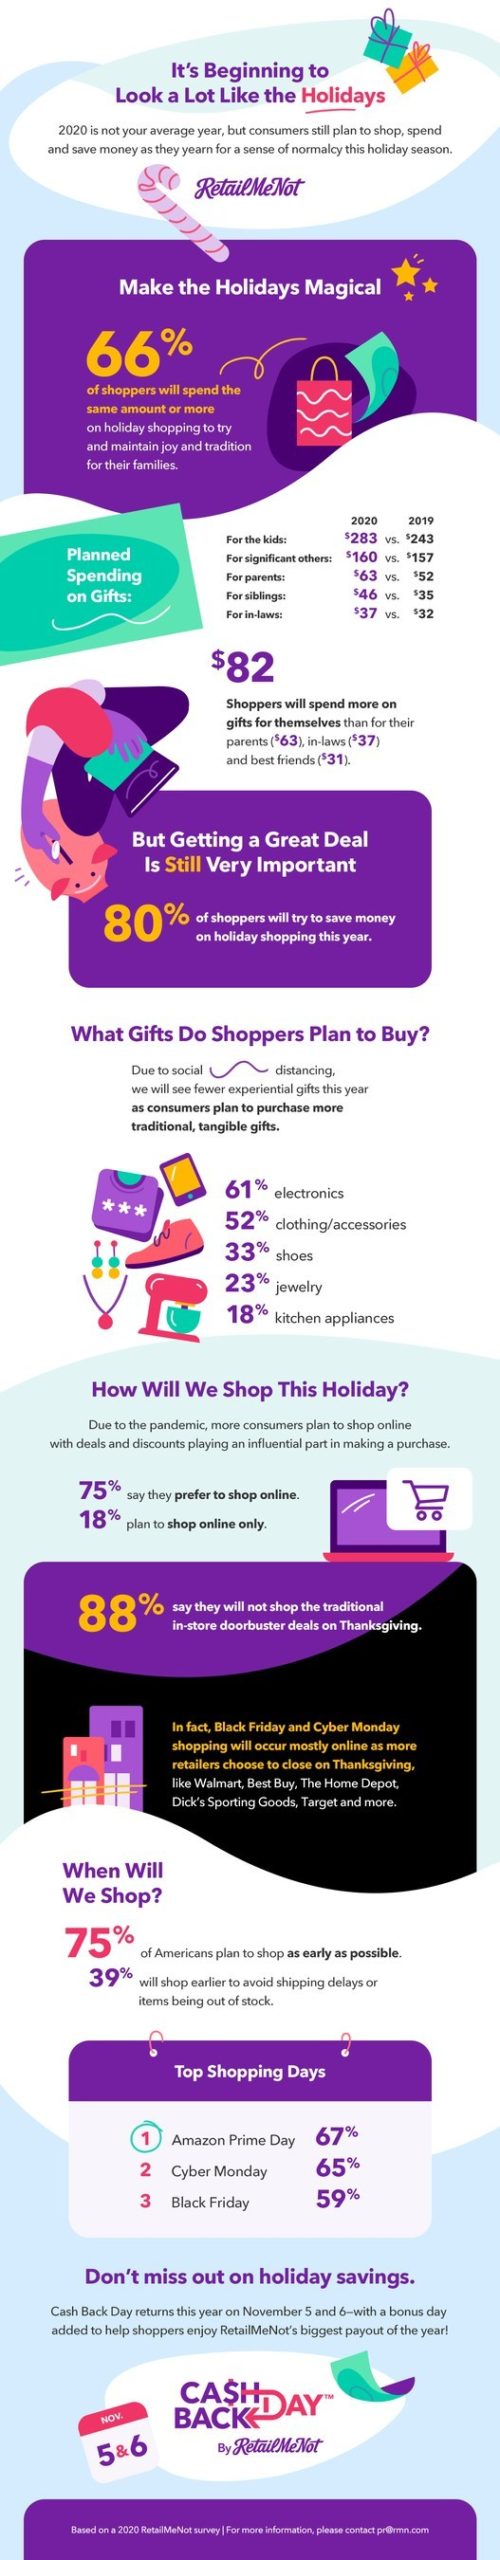 Graphic of survey results from retailmenot on 2020 Christmas gift budget spending